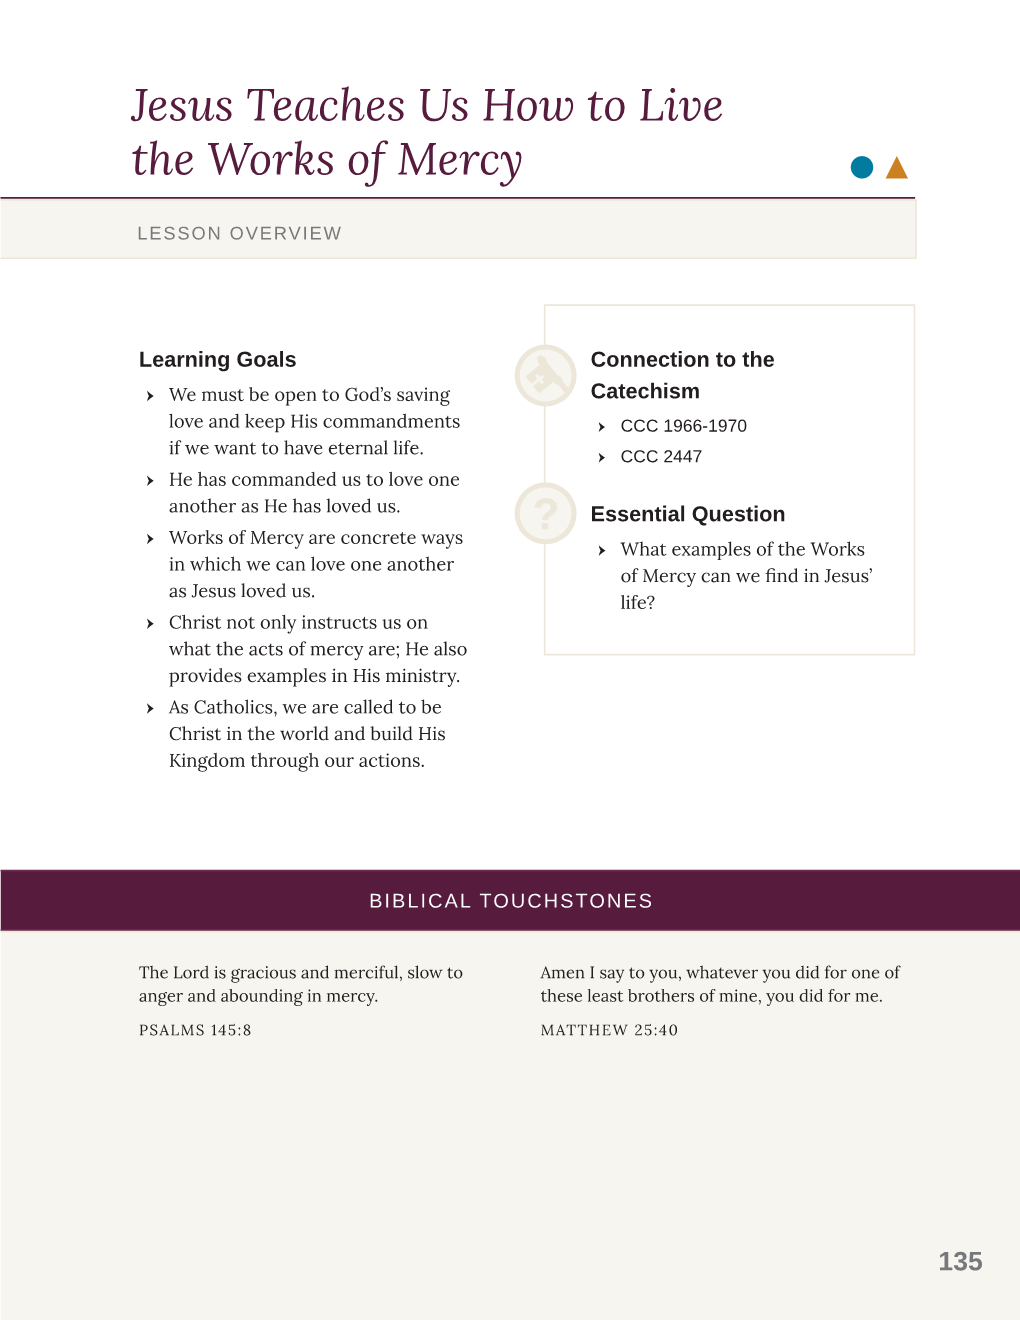 Jesus Teaches Us How to Live the Works of Mercy